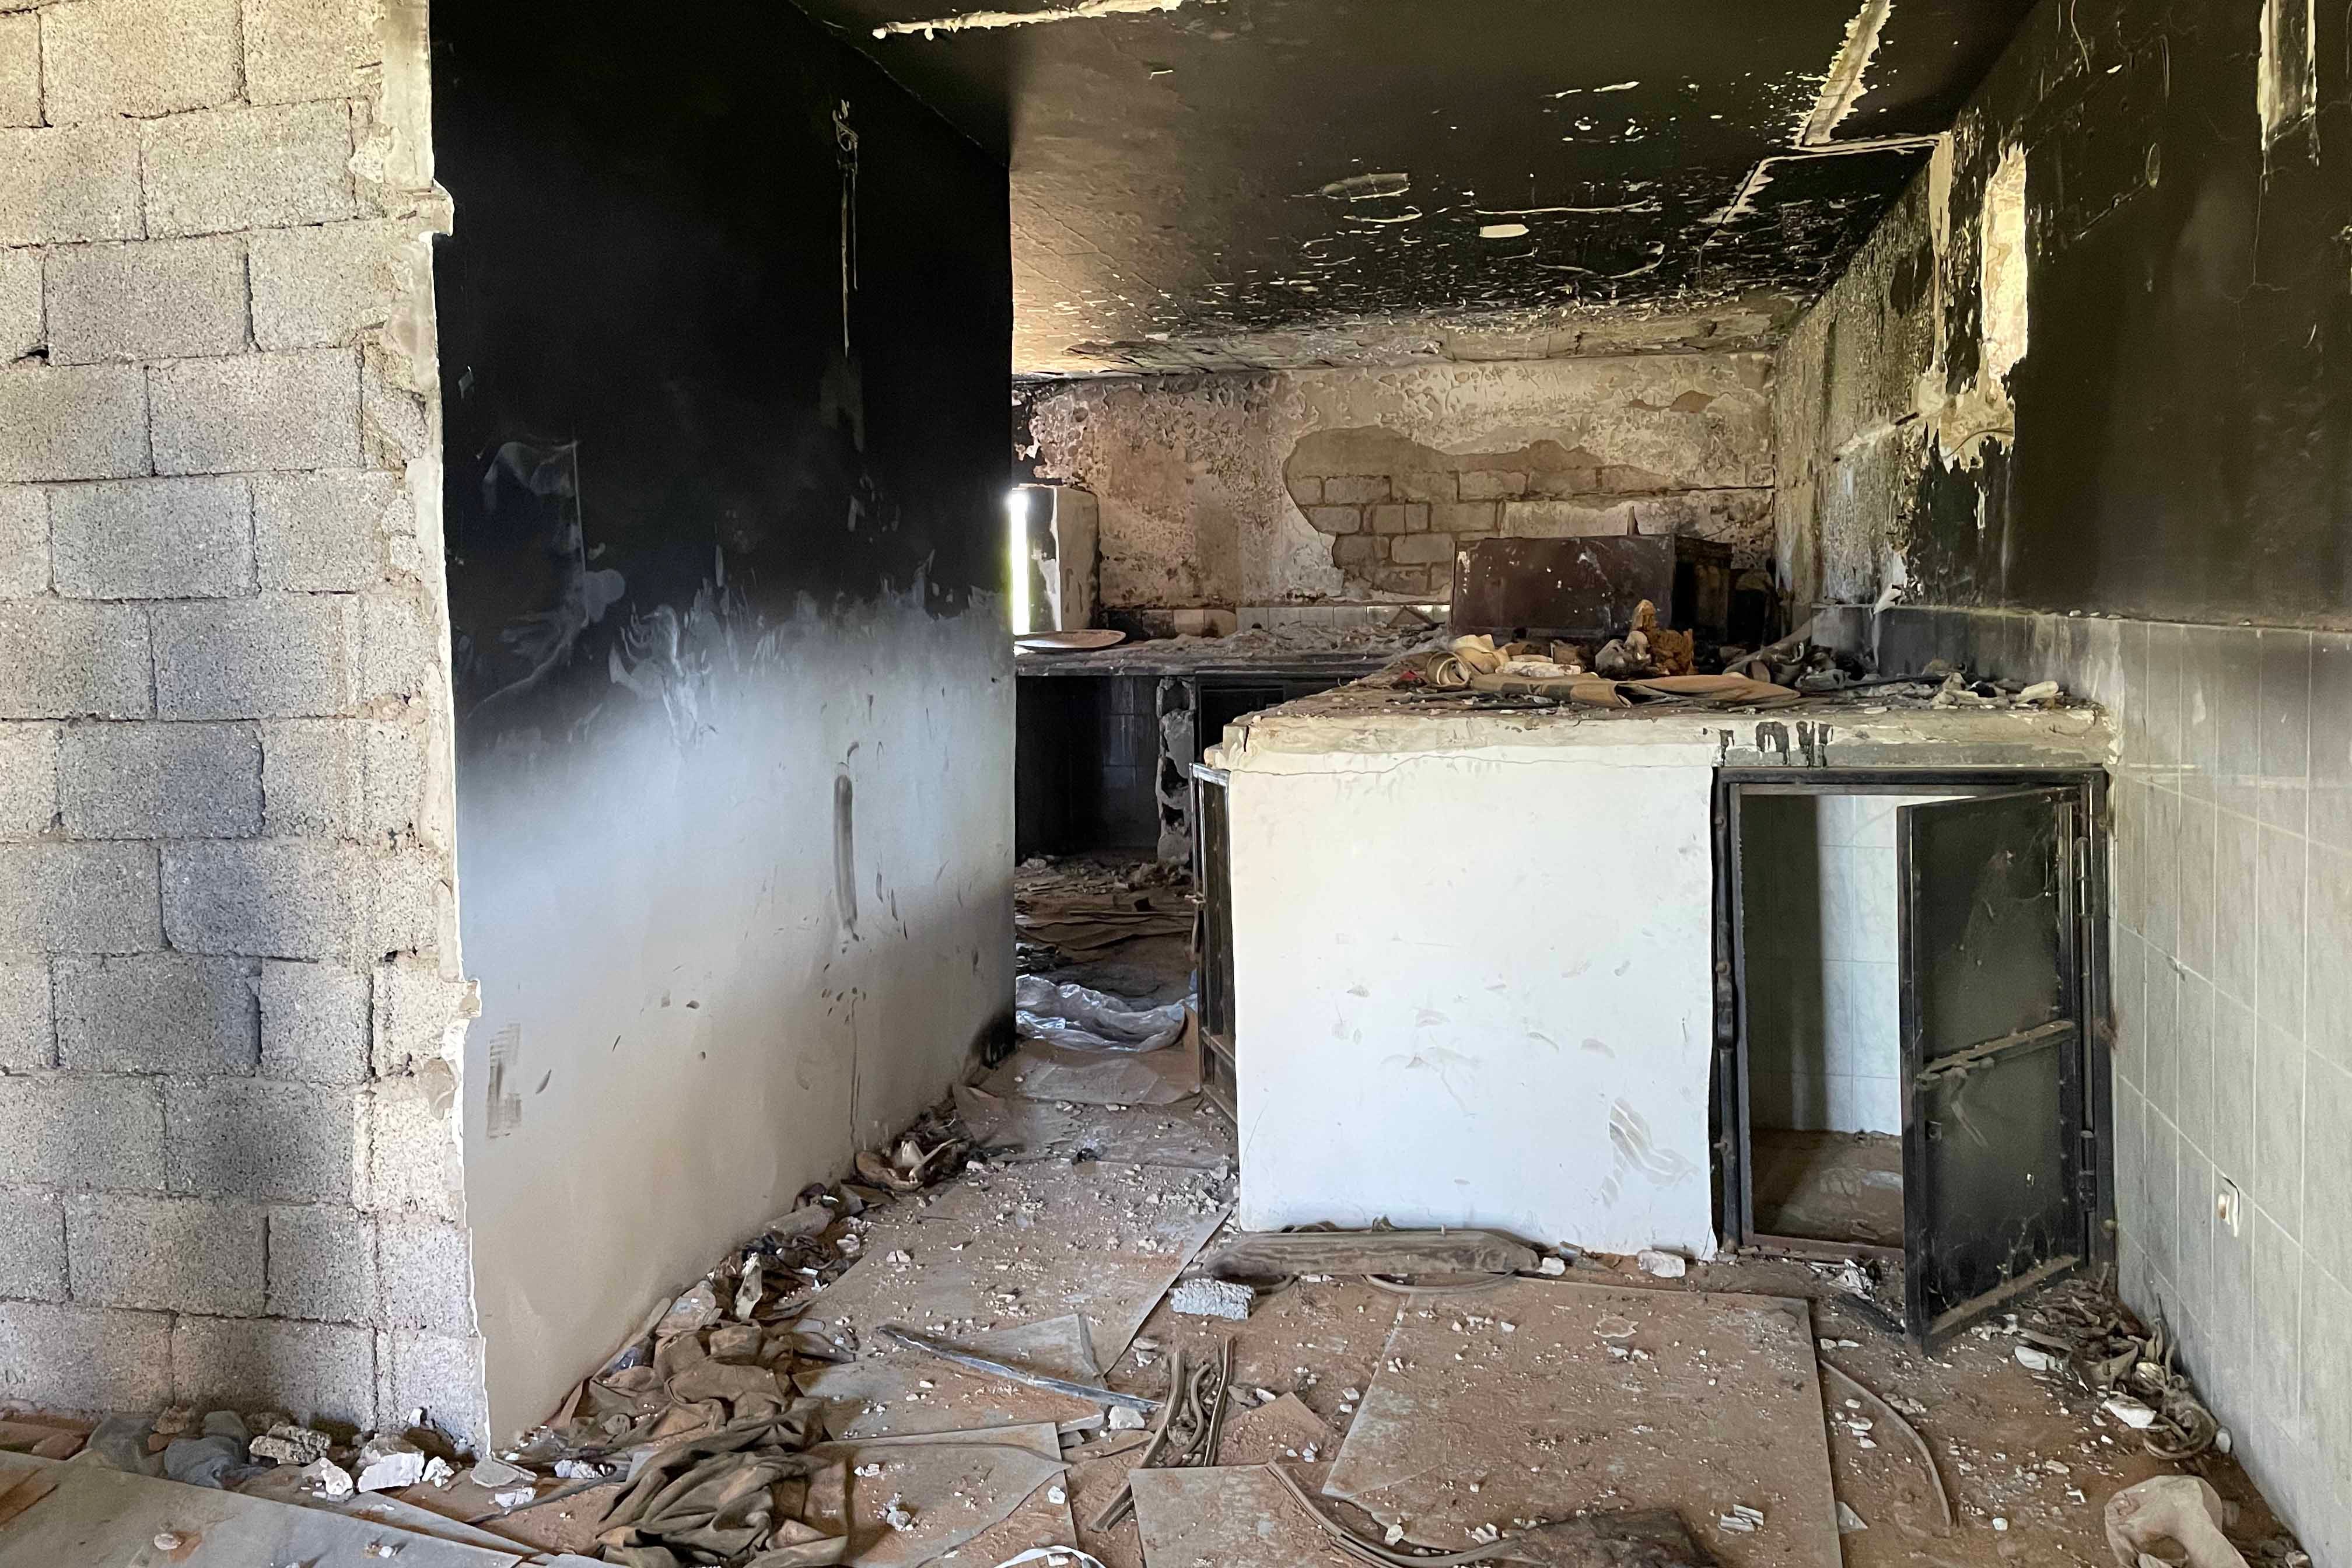 Abandoned and burnt cells at make-shift prison known as “Boxes Prison” in Tarhouna, used to detain, ill-treat, and disappear detainees during 2019-2020 conflict.